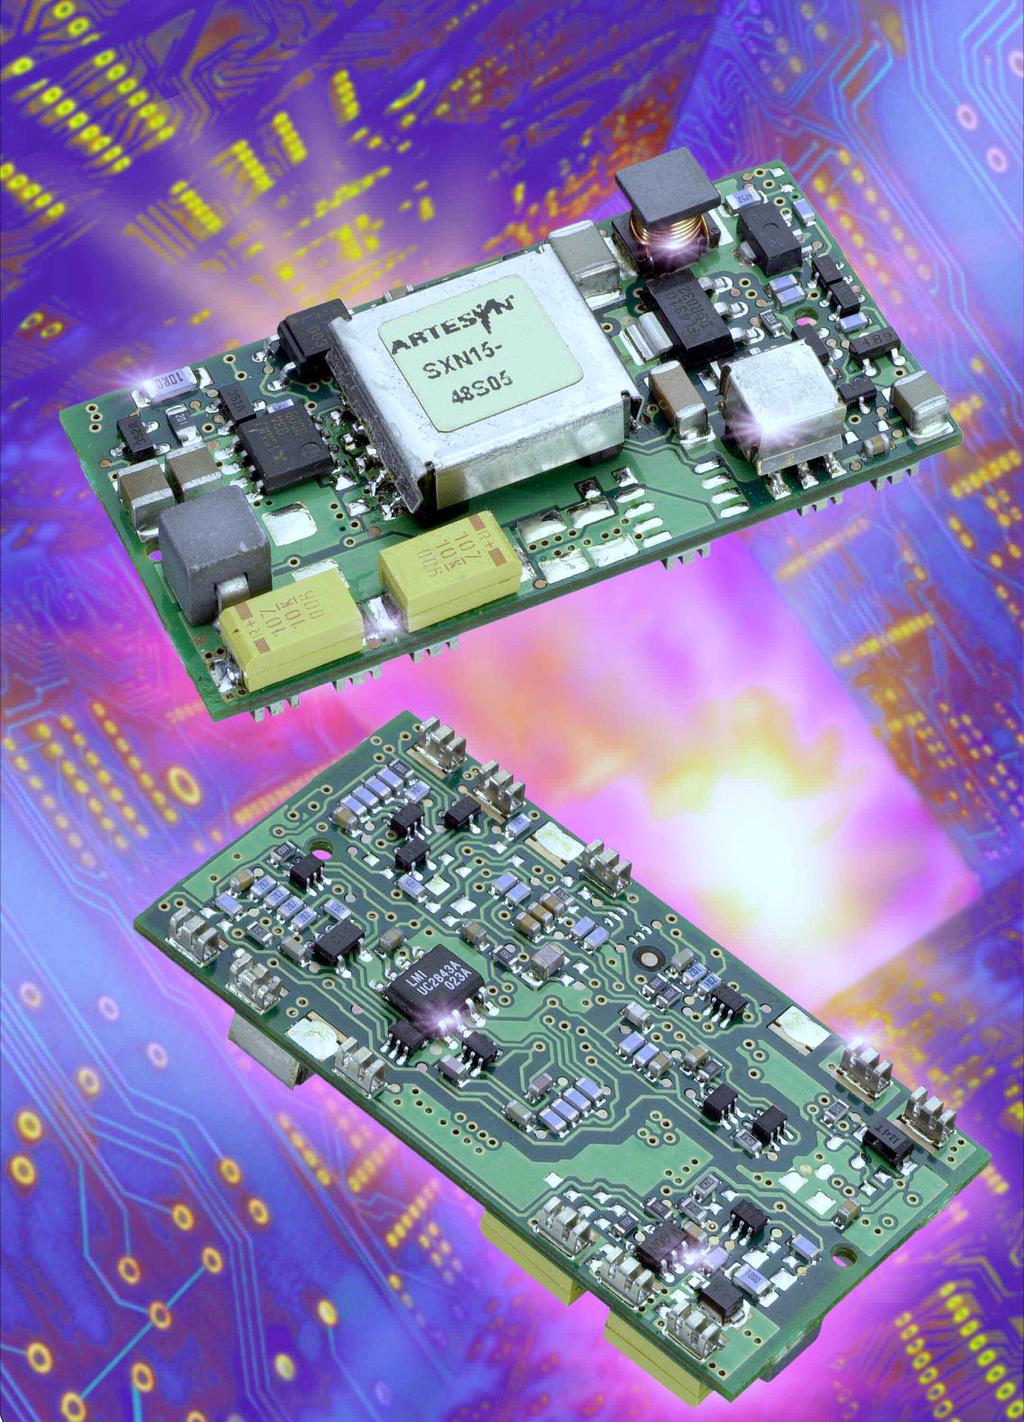 SXN15 48V SERIES Dual output High efficiency topology, 86% typical at 5V/3.